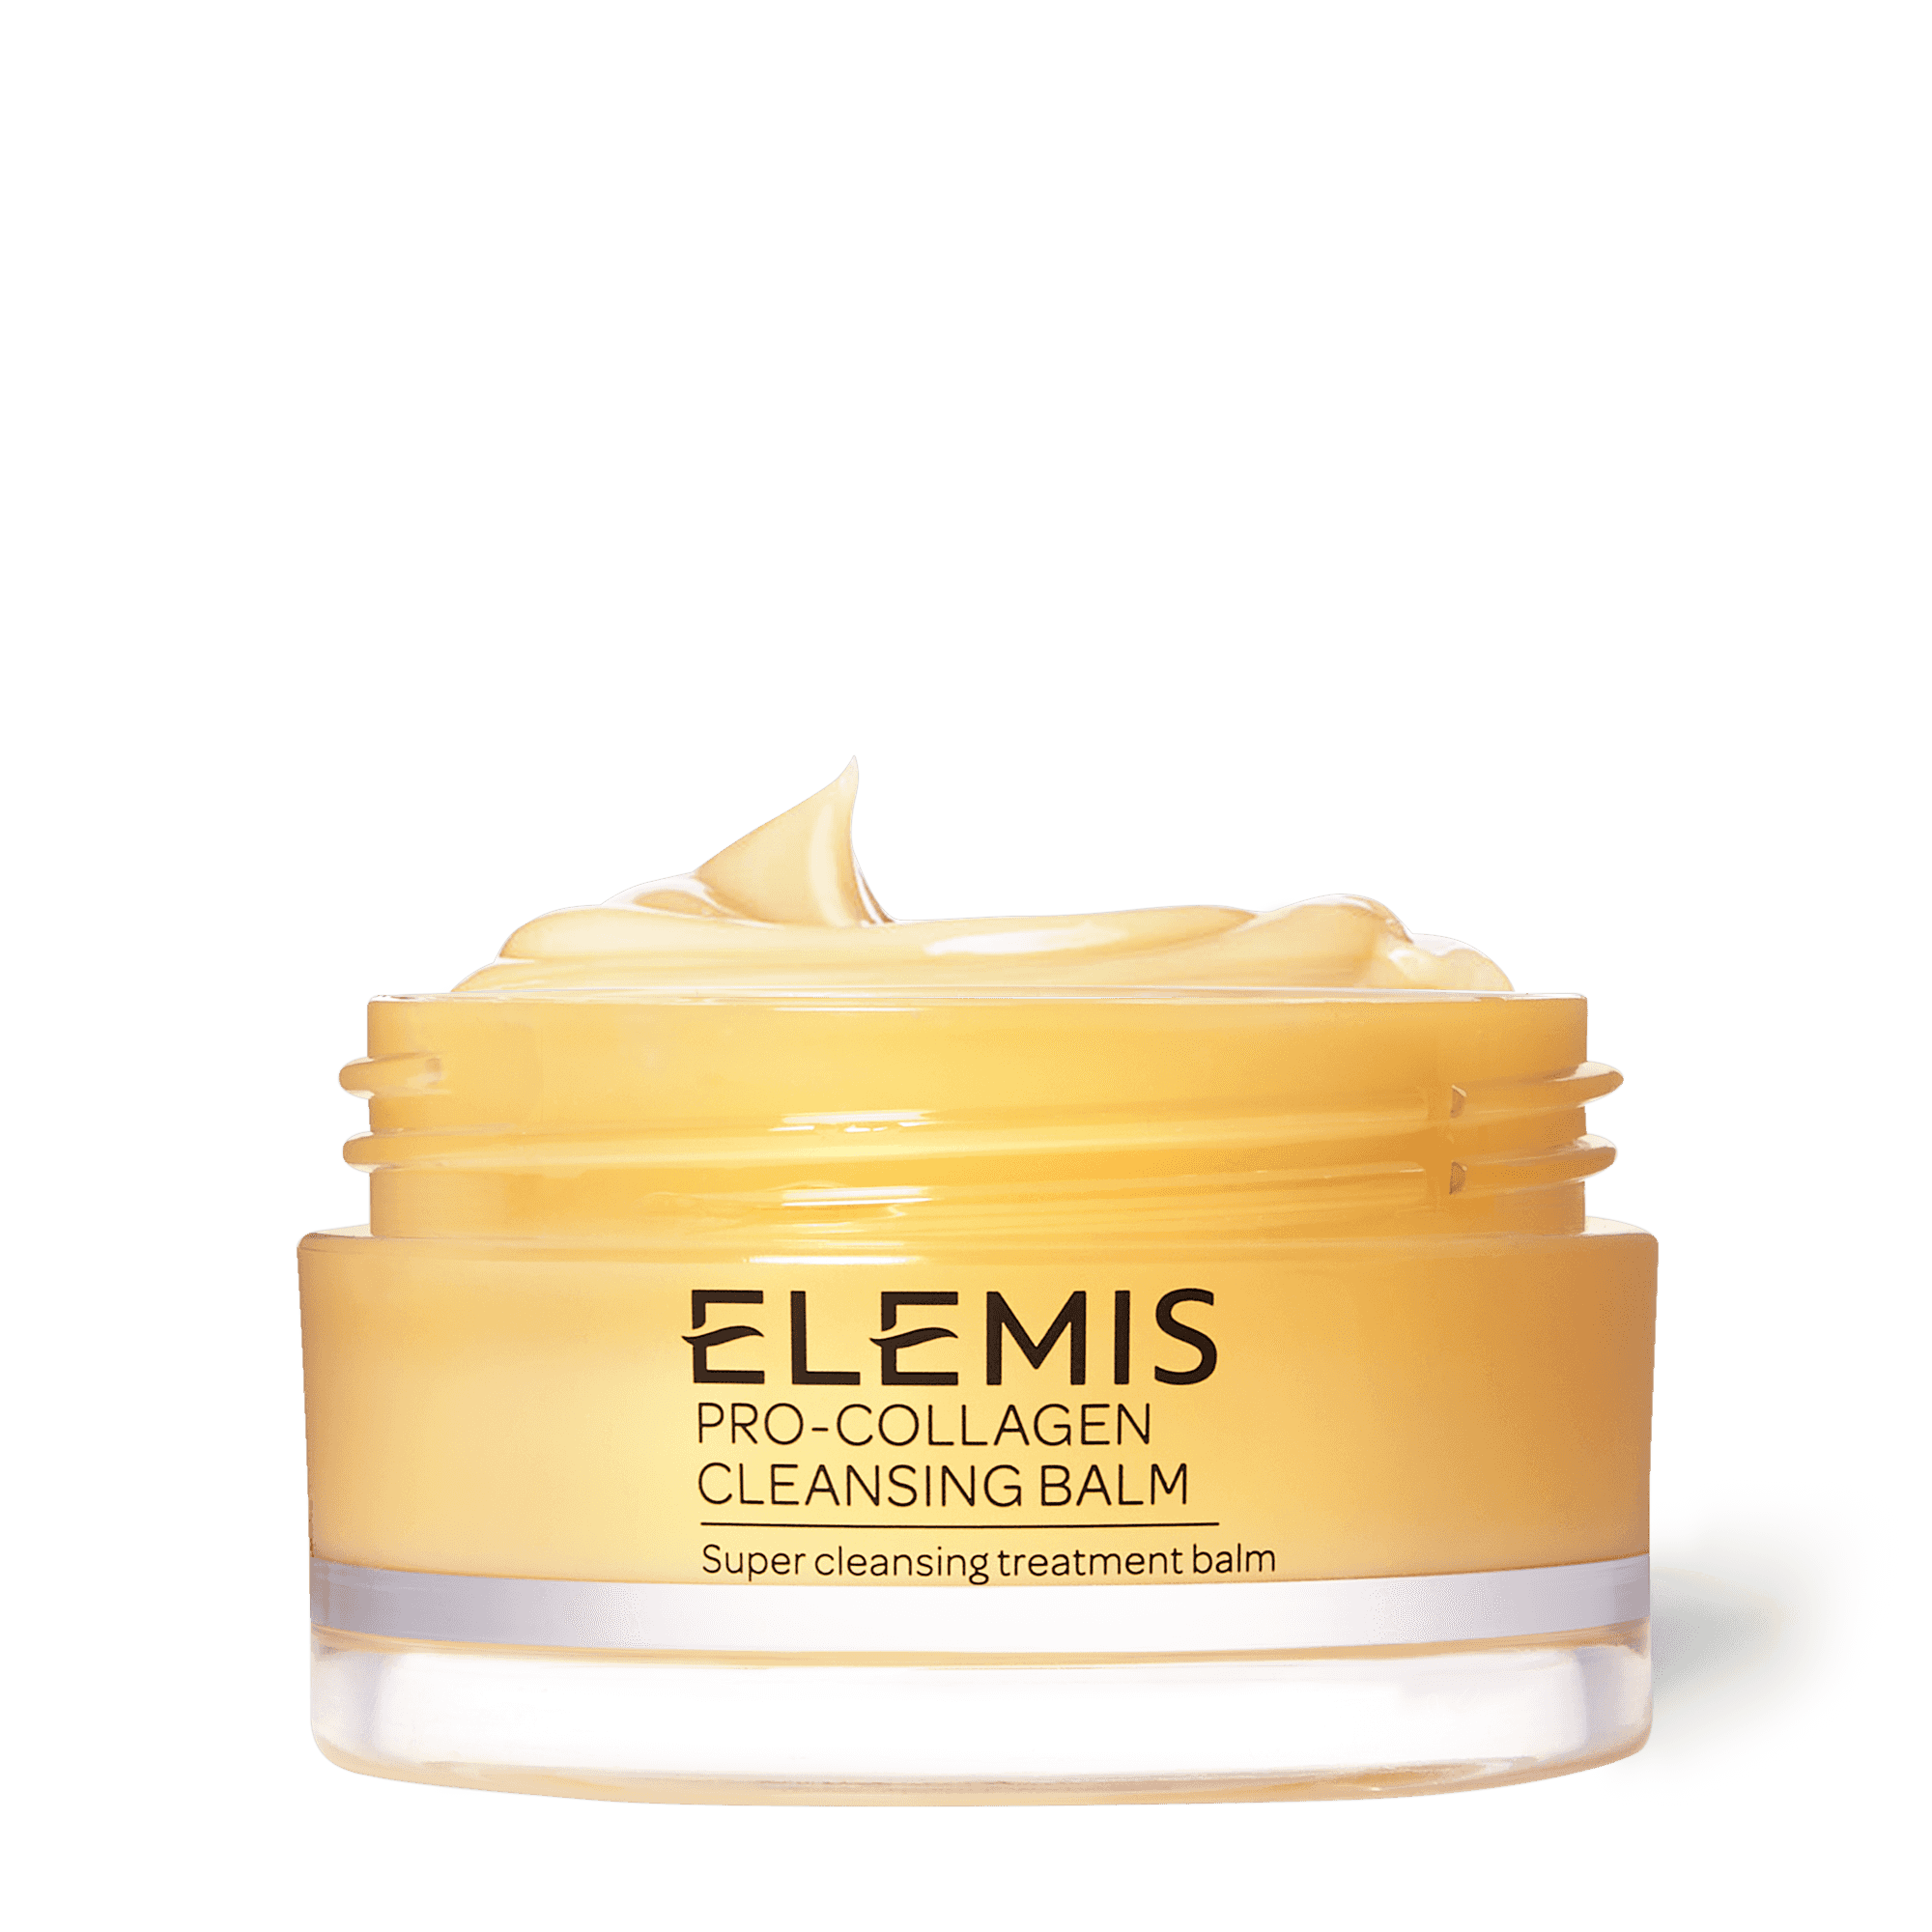 ELEMIS Pro-Collagen Cleansing Balm 50g For All Skin Types, 50 g